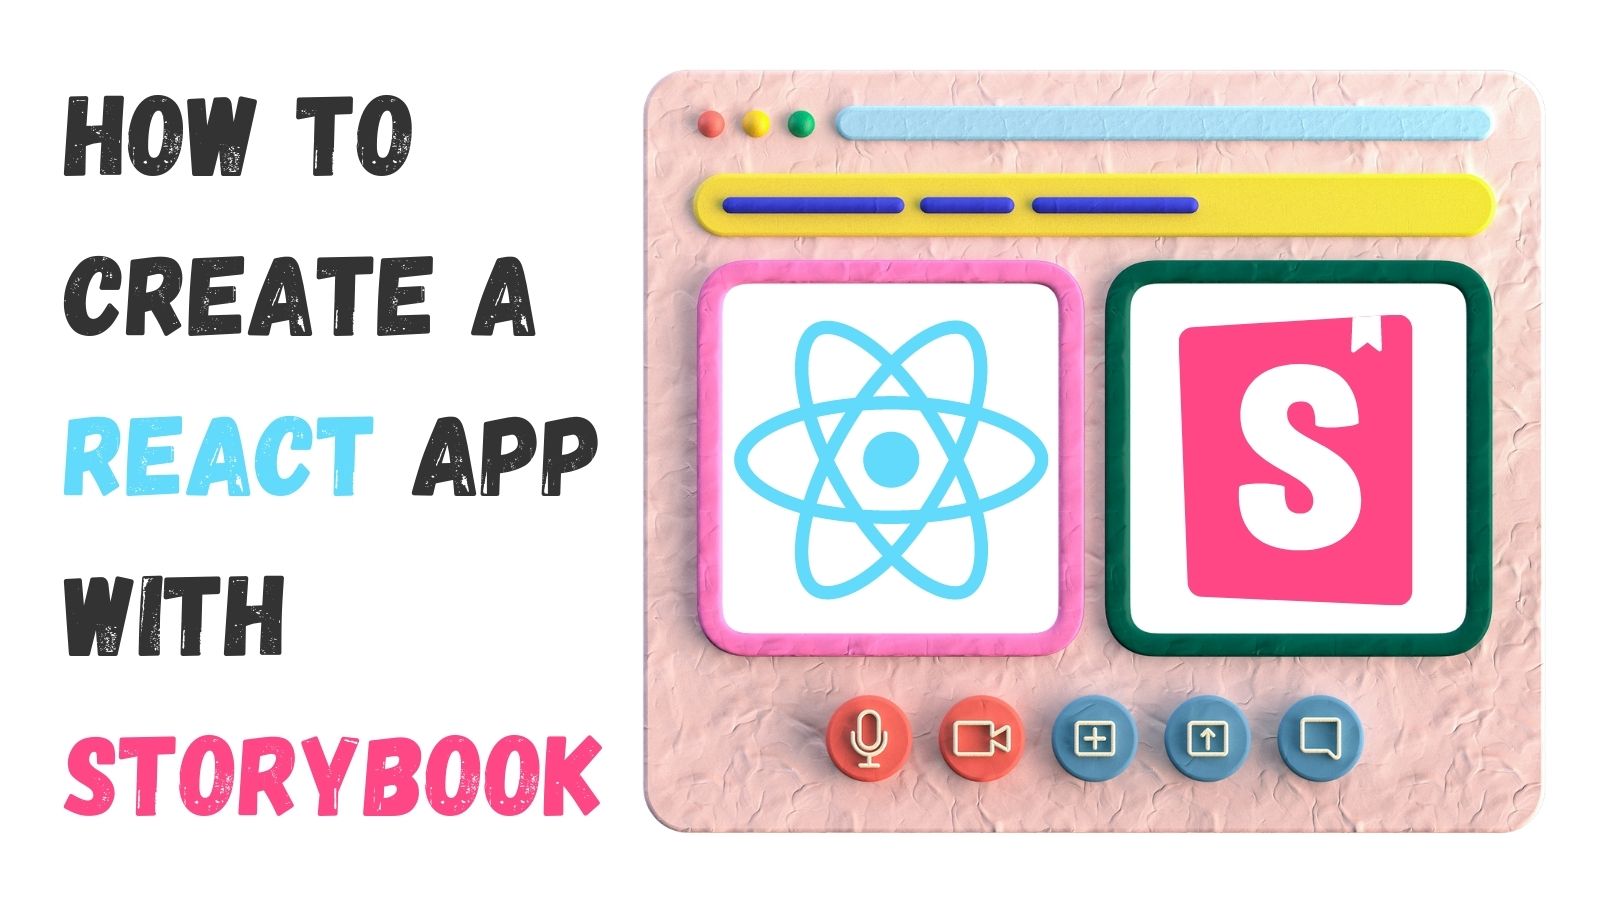 How to Create a React App with Storybook